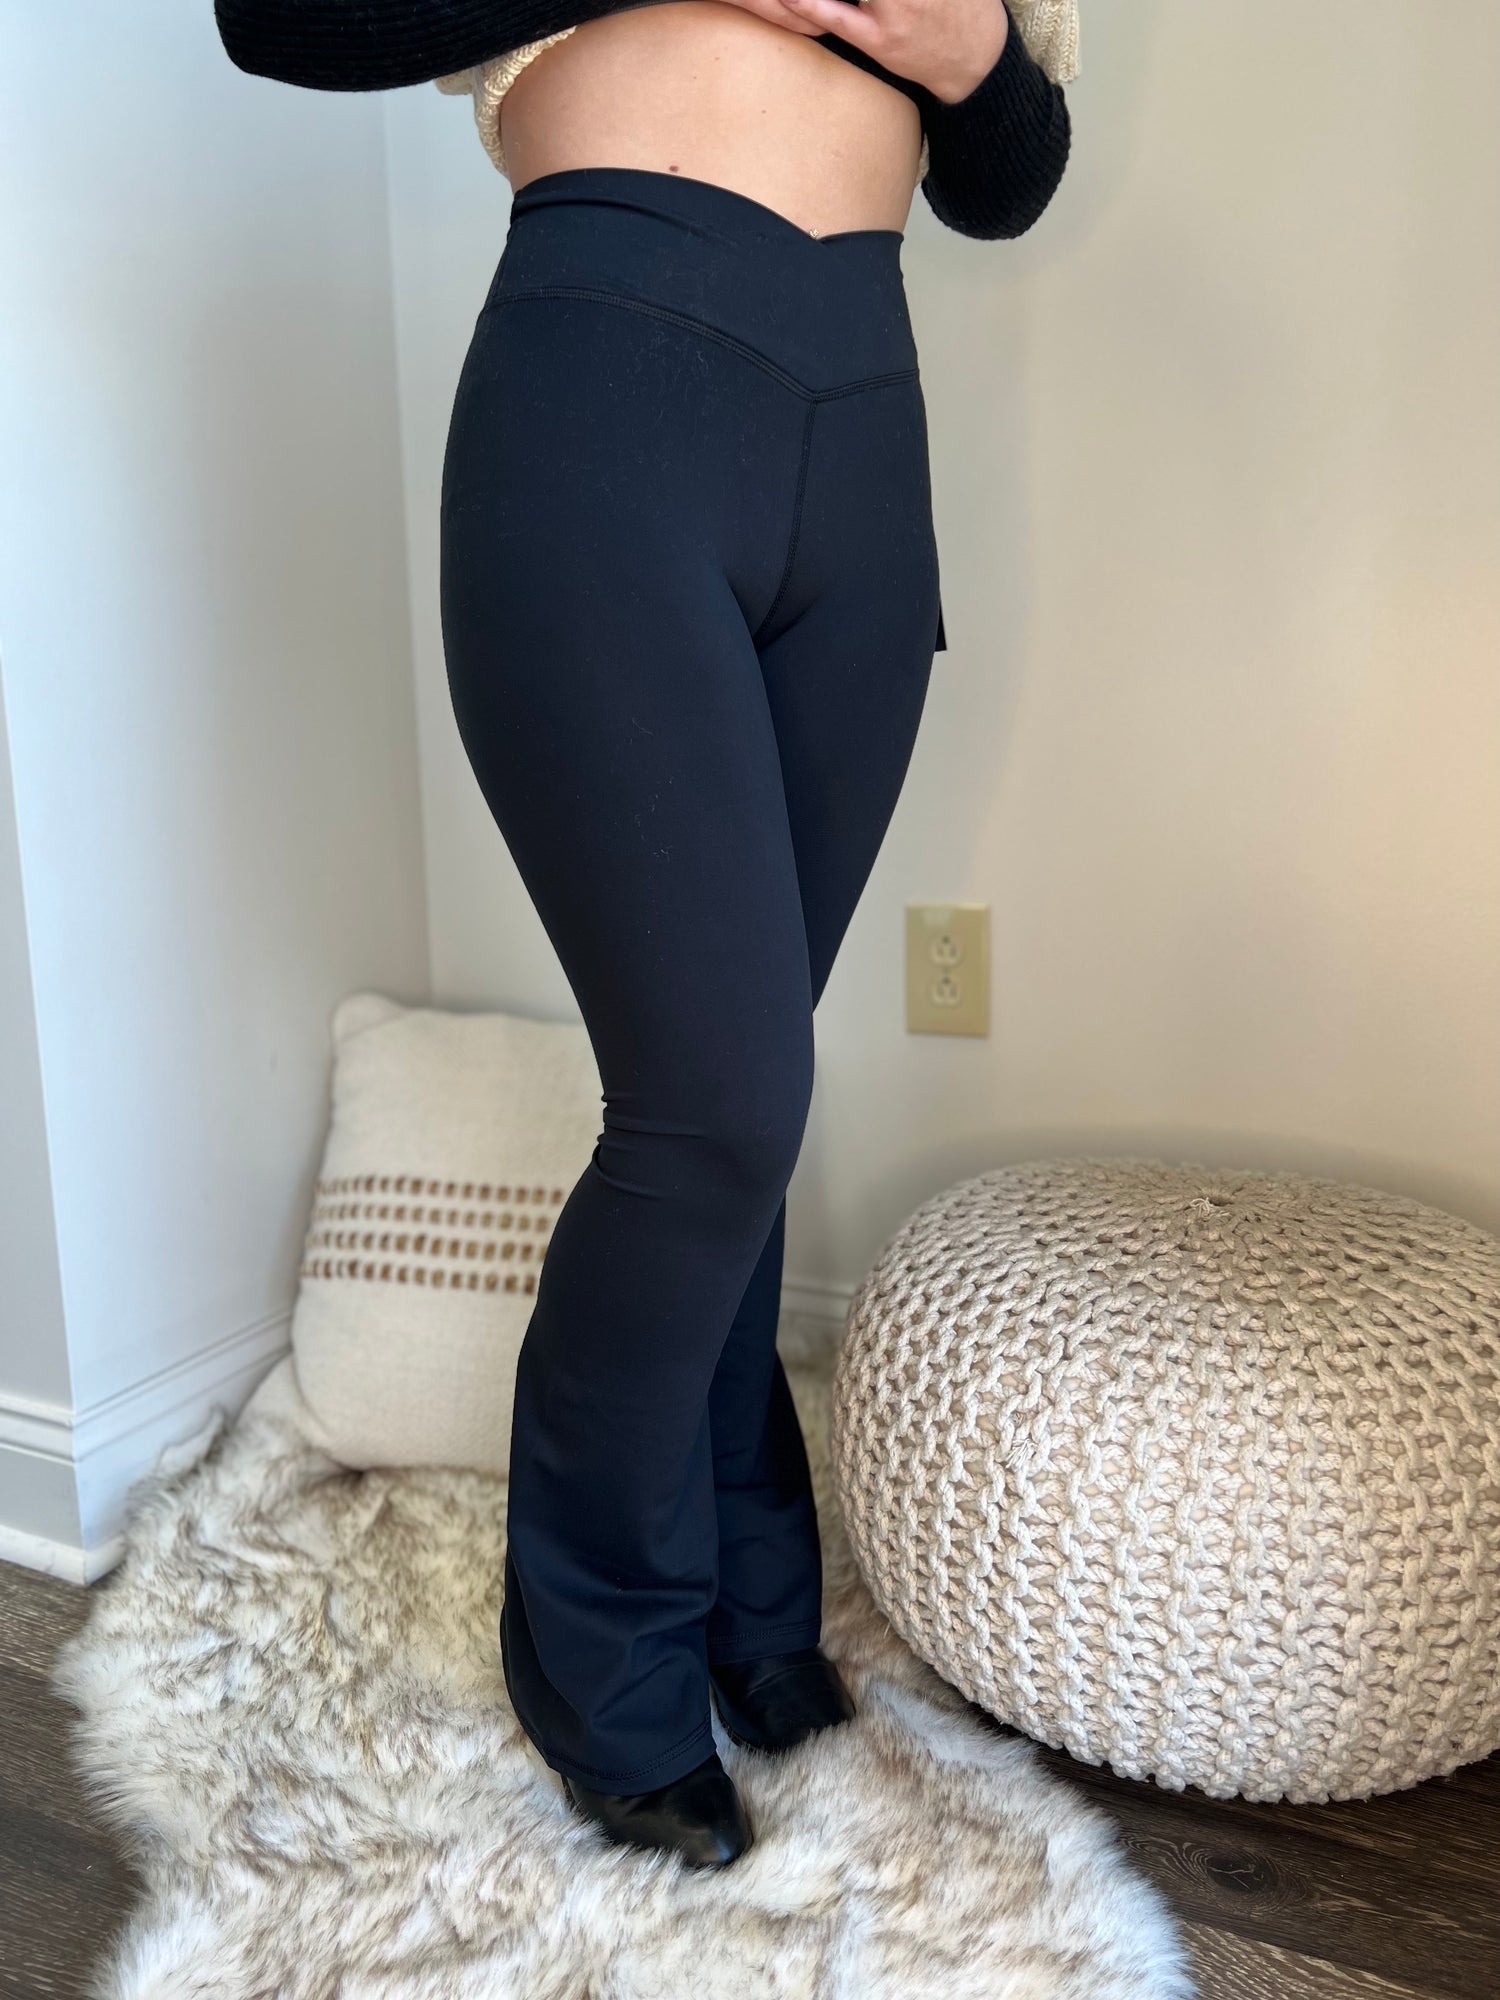 Linda Crossover Flared Yoga Pants (Regular and Lush) – Allie and